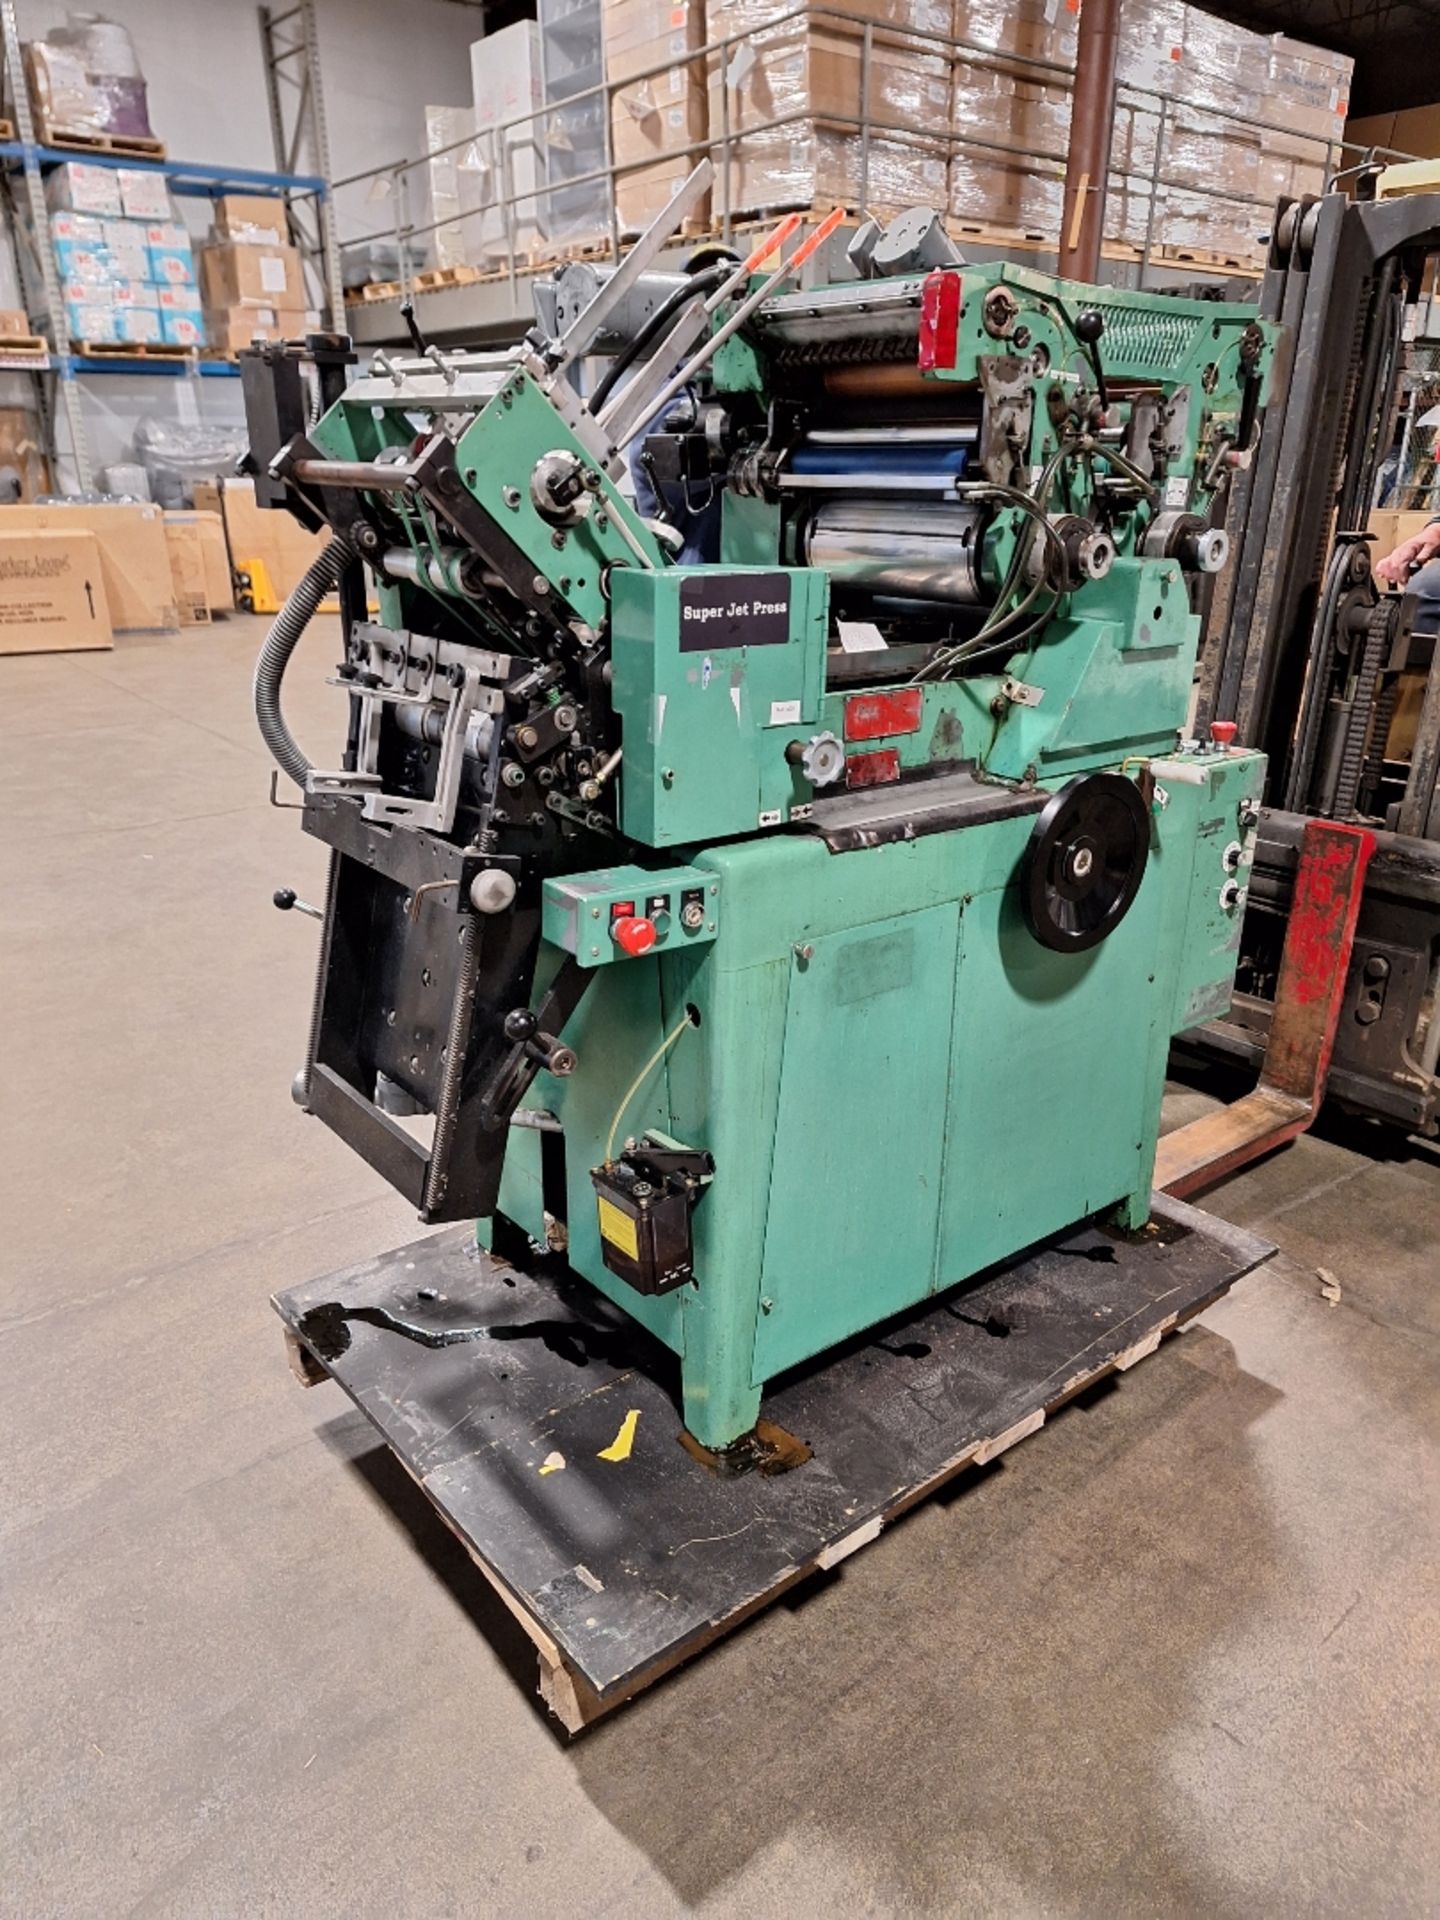 Halm 2 Color Jet Press. This lot is located in Binghamton, NY 13901